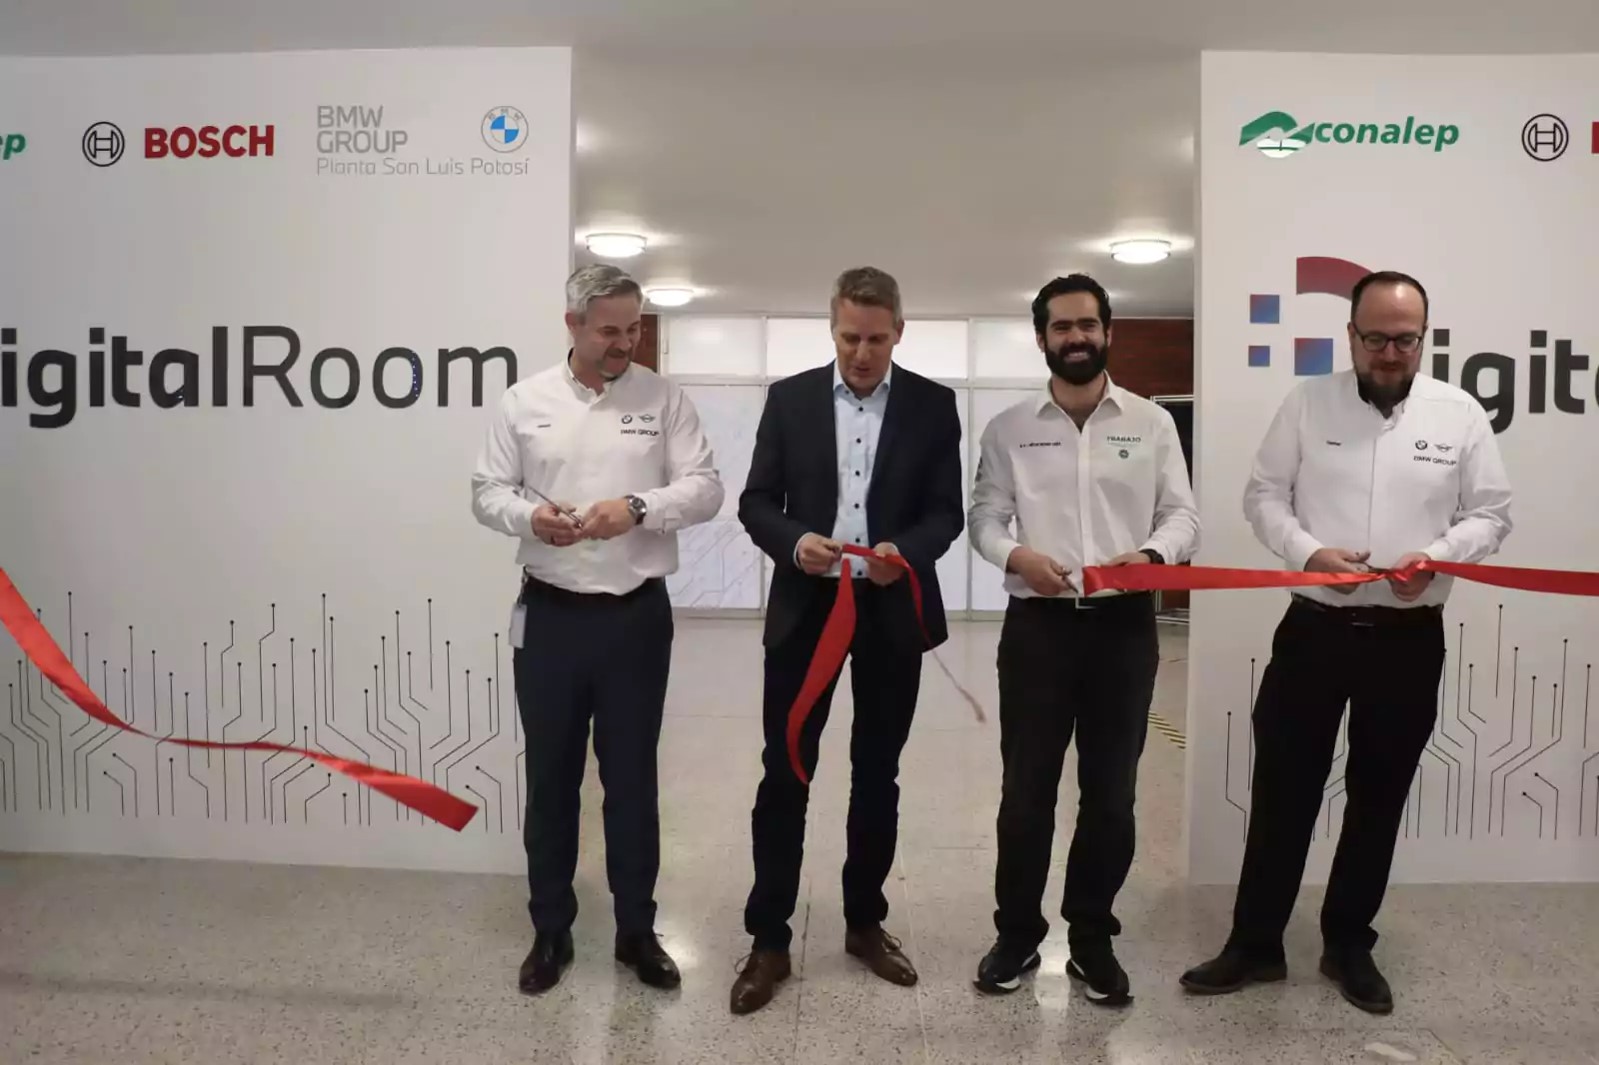 BMW Group and Bosch inaugurated new Digital Classroom in SLP